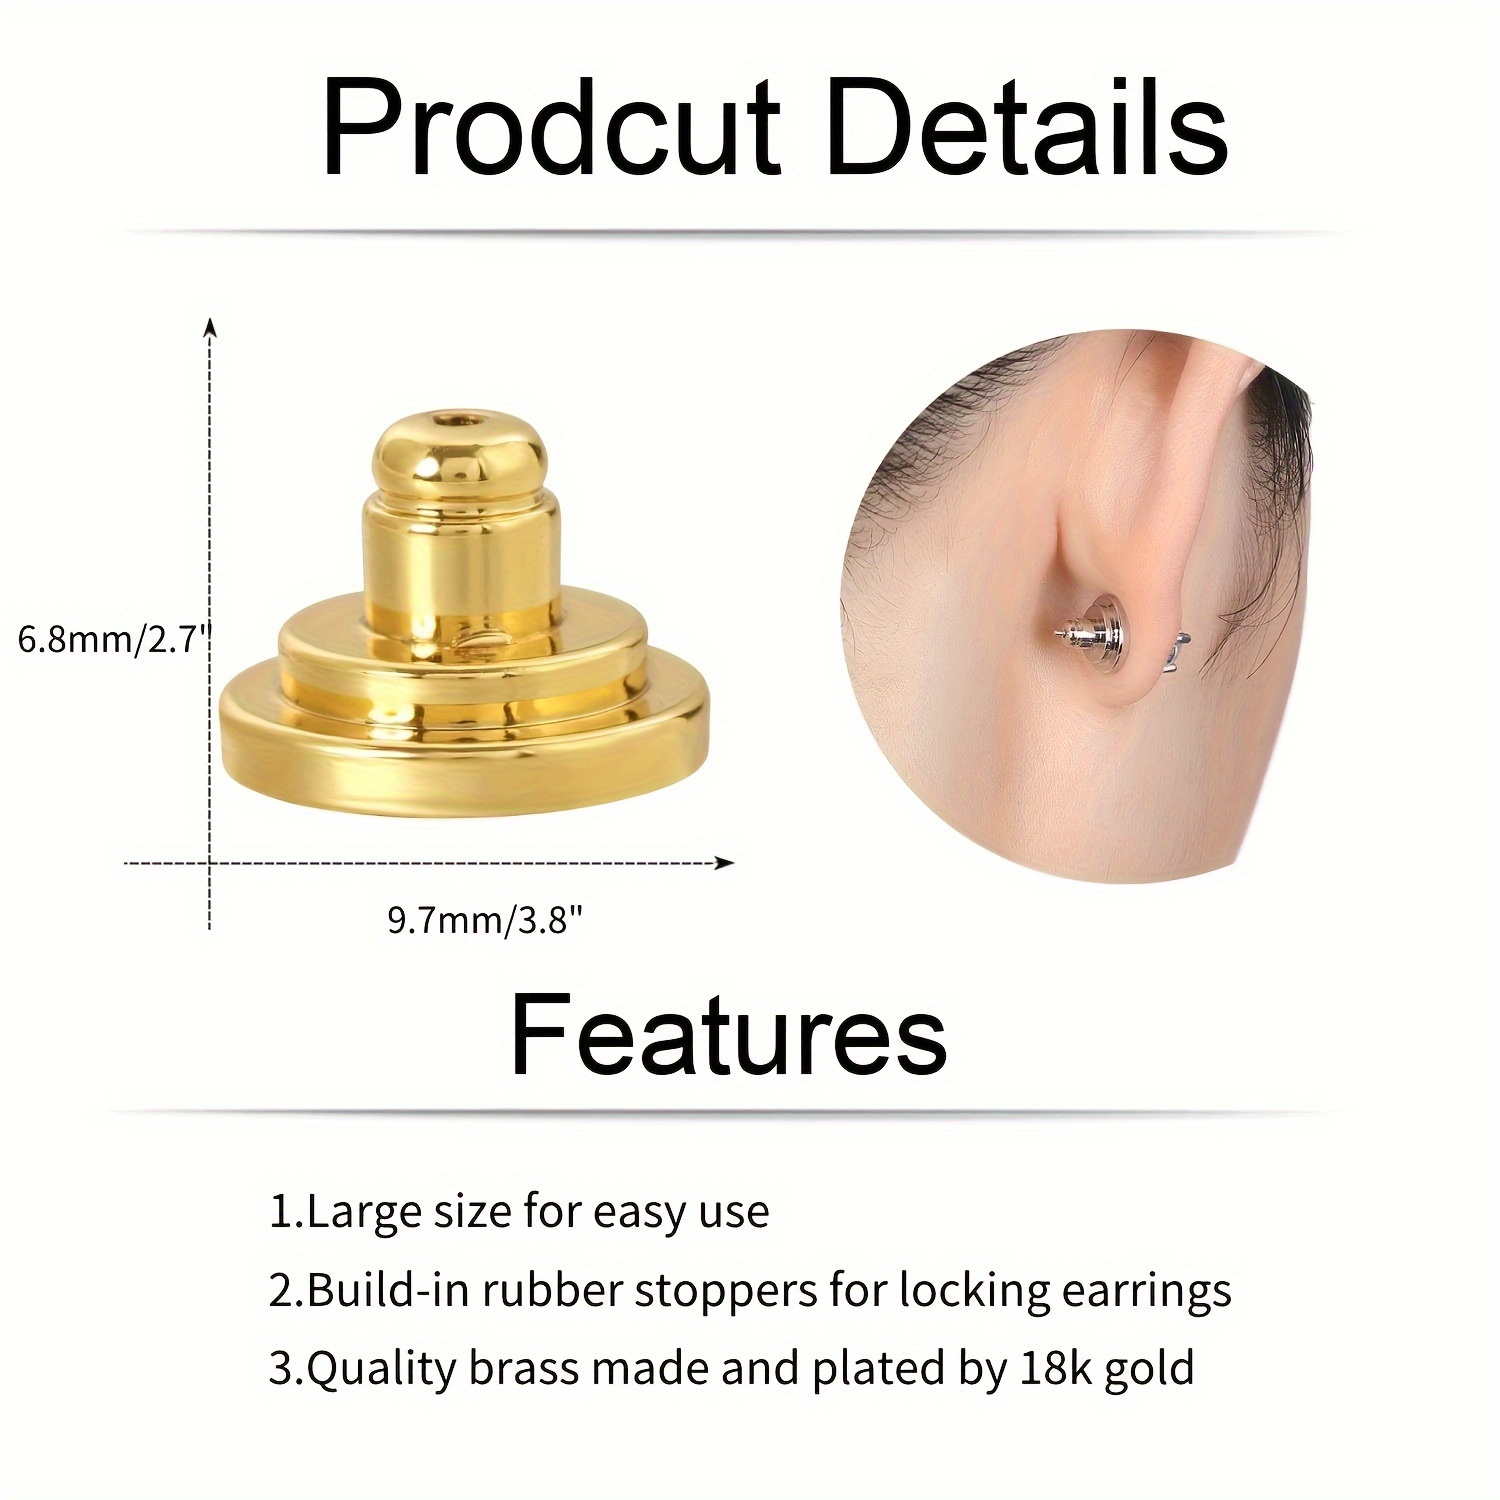 Earring Lifters Hypoallergenic Earring Backs for Droopy Ears Adjustable  Secure Earring Backs Repacements for Heavy Studs Droopy Earrings  (Gold&Silver) 